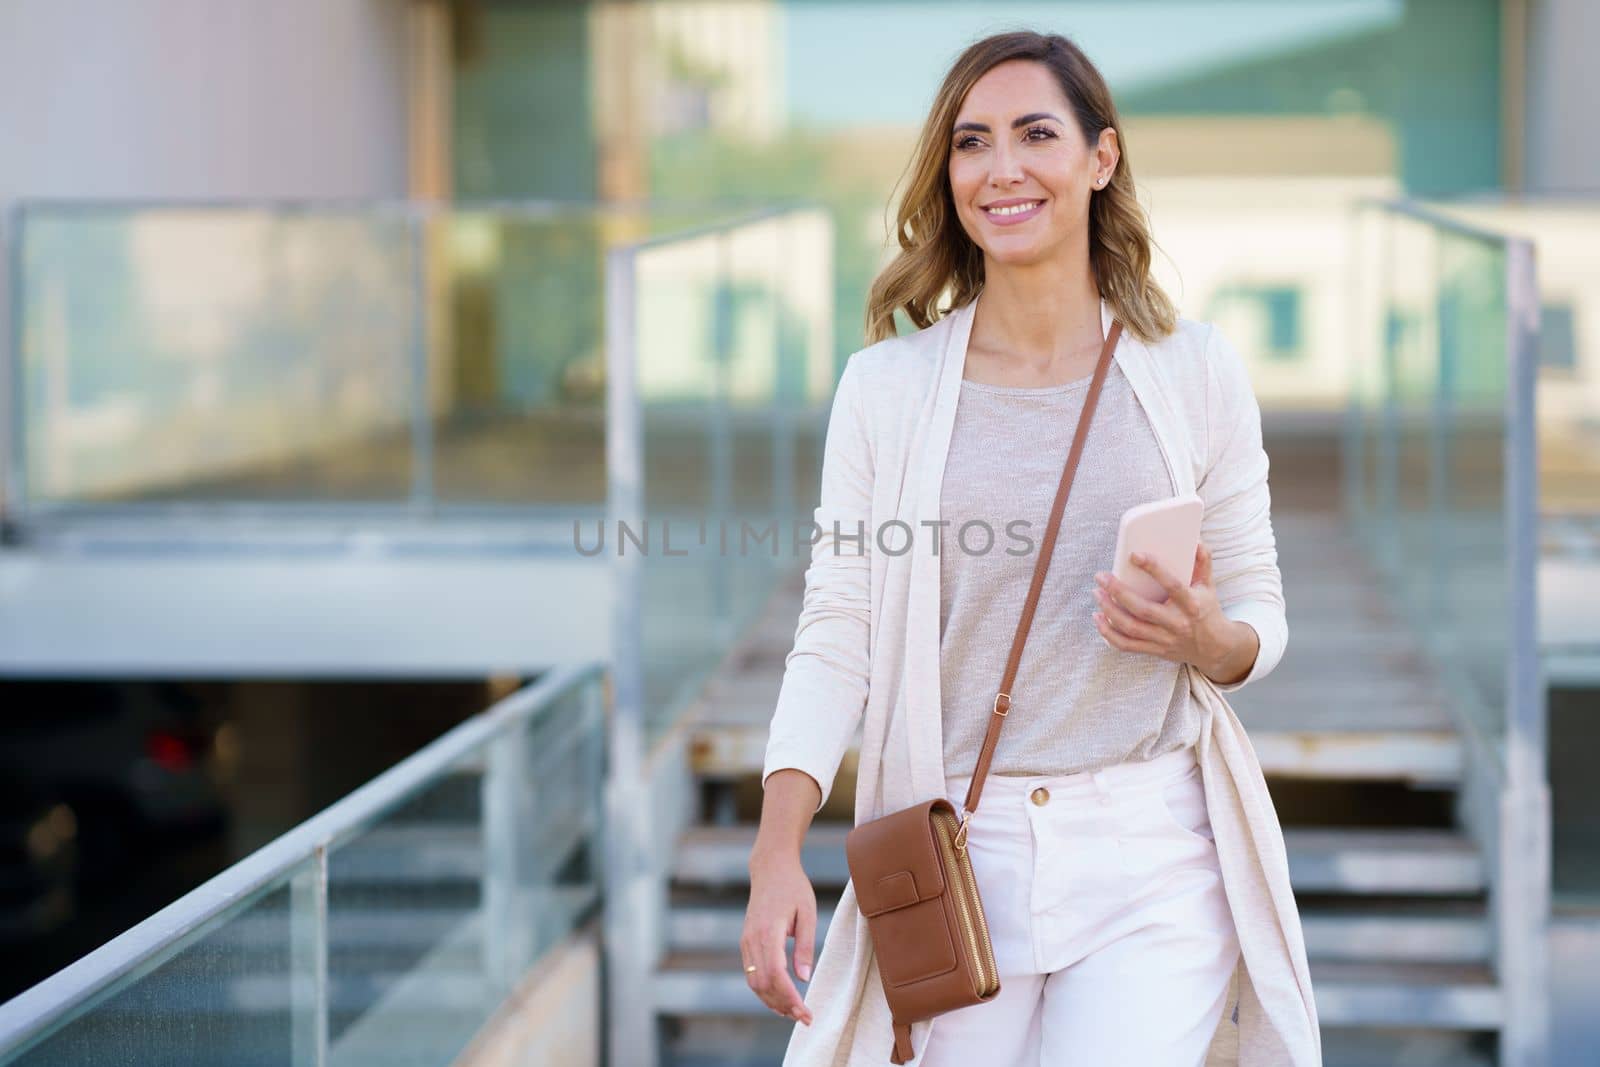 Middle aged female standing near an office building carrying a handbag and a smartphone. Caucasian woman in urban background.